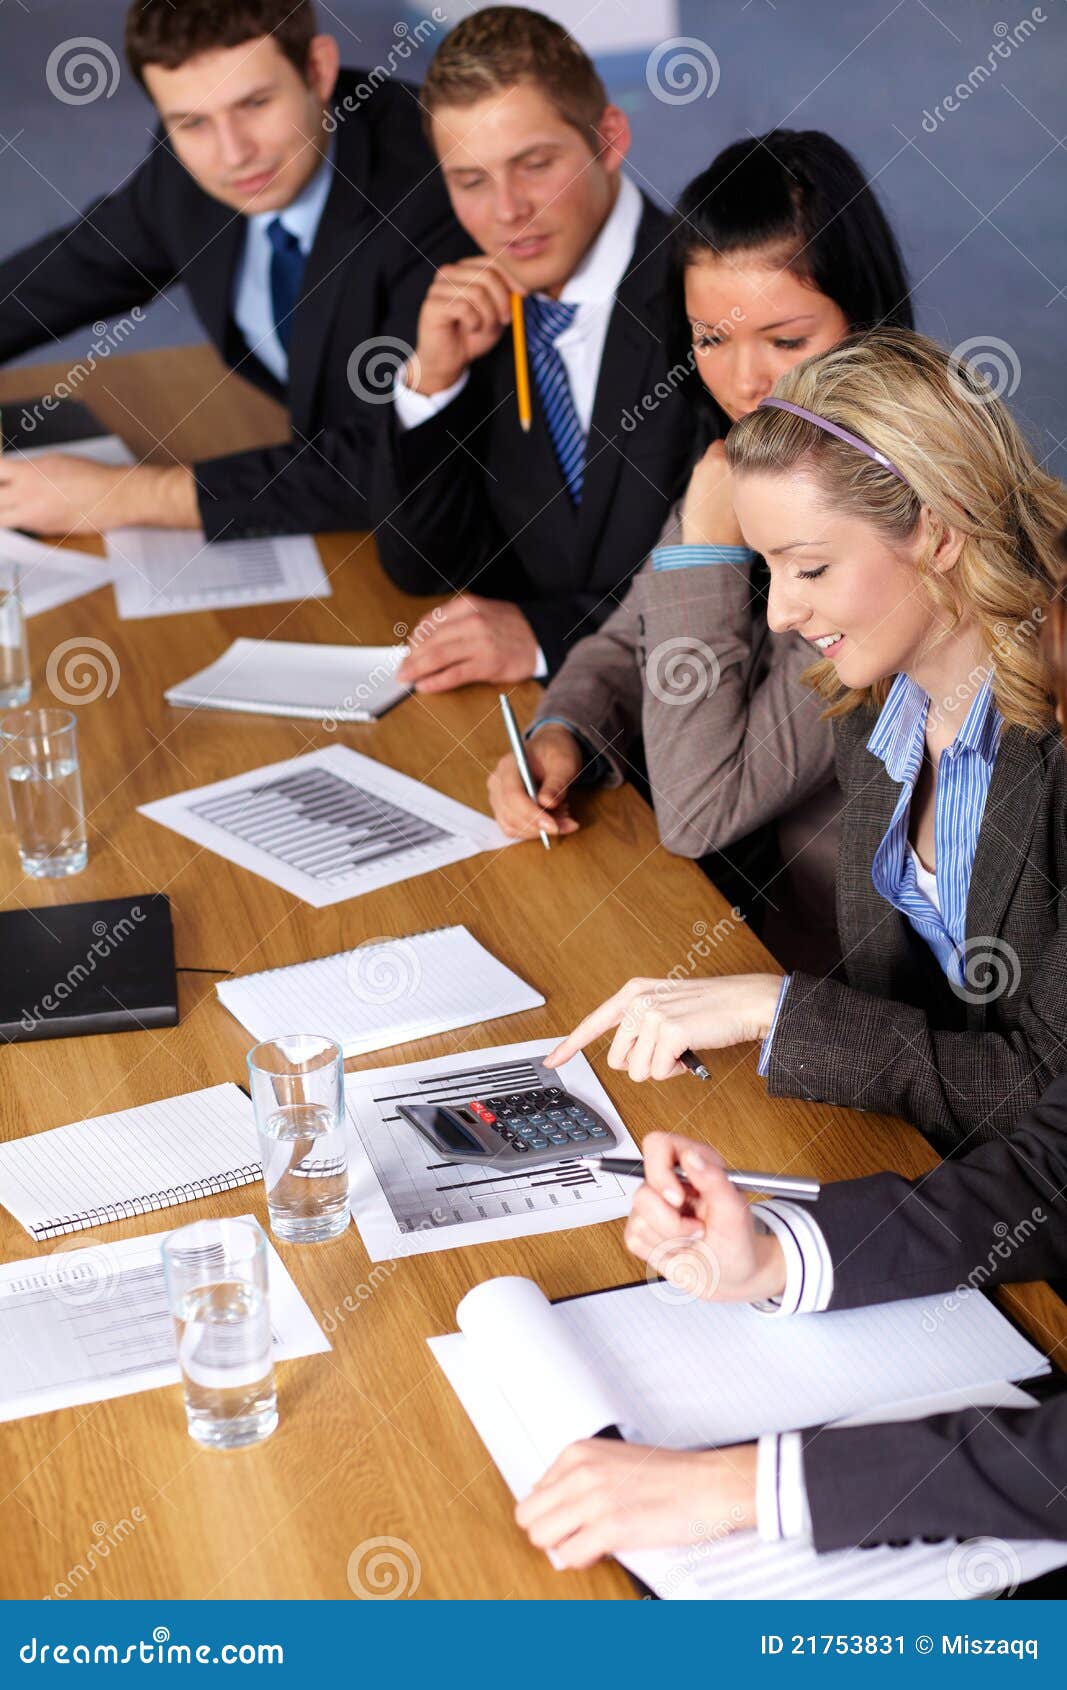 team of 5 business people working on calculations